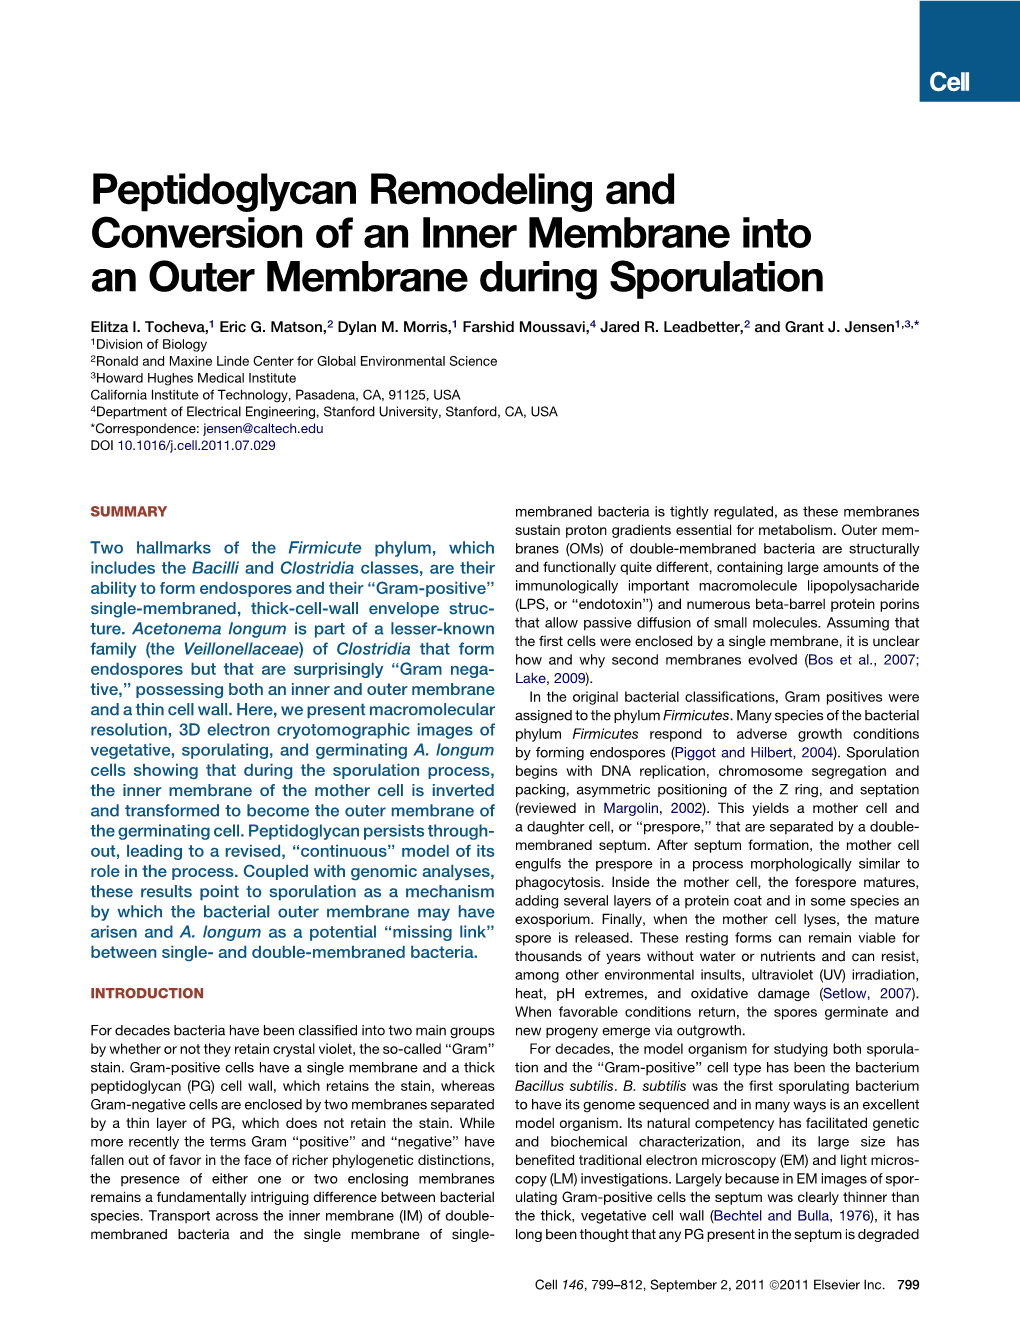 Peptidoglycan Remodeling and Conversion of an Inner Membrane Into an Outer Membrane During Sporulation